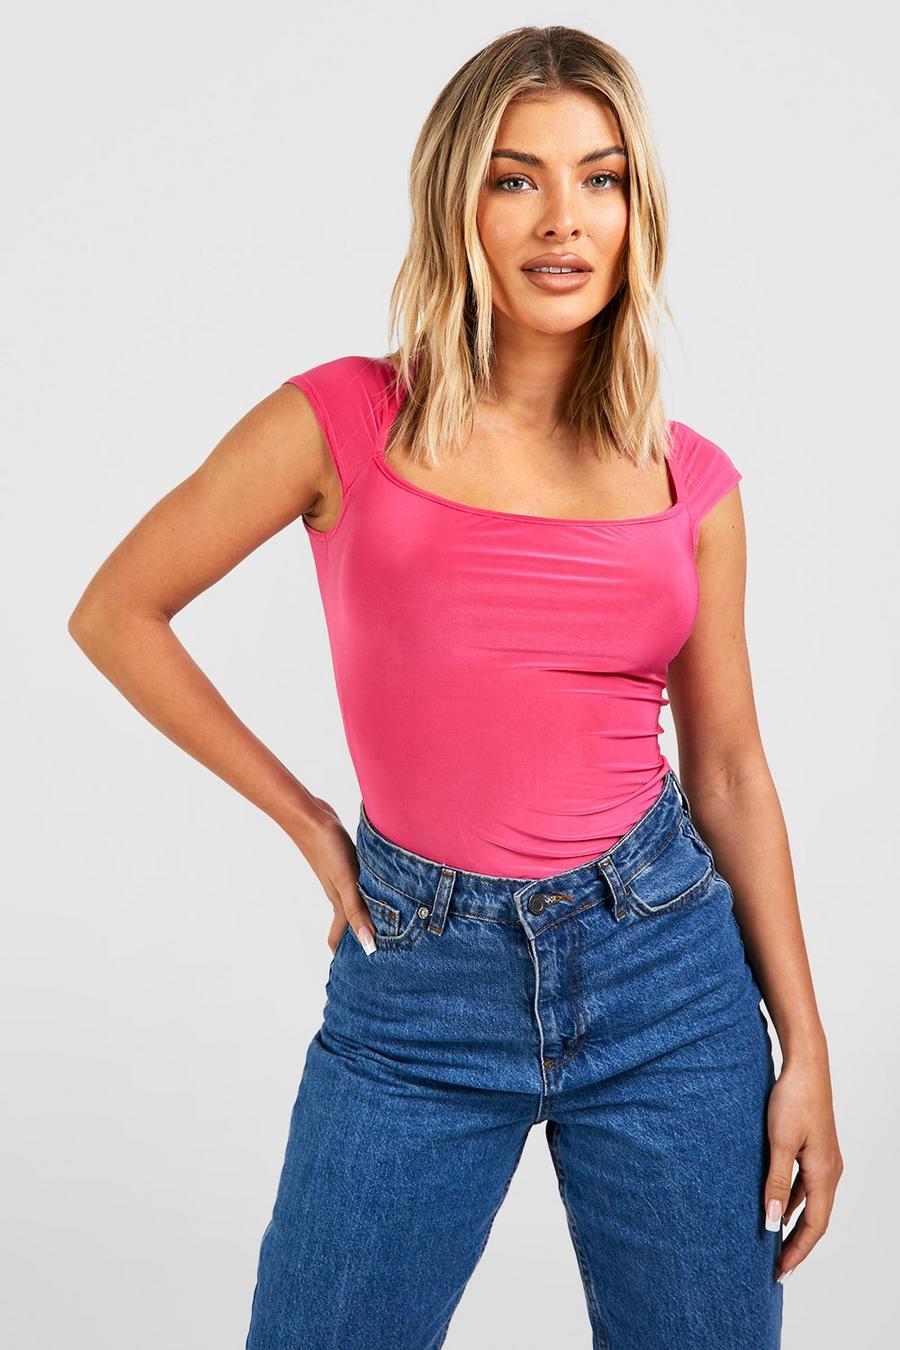 Slinky Cap Sleeve Square Neck Top, Hot pink rosa